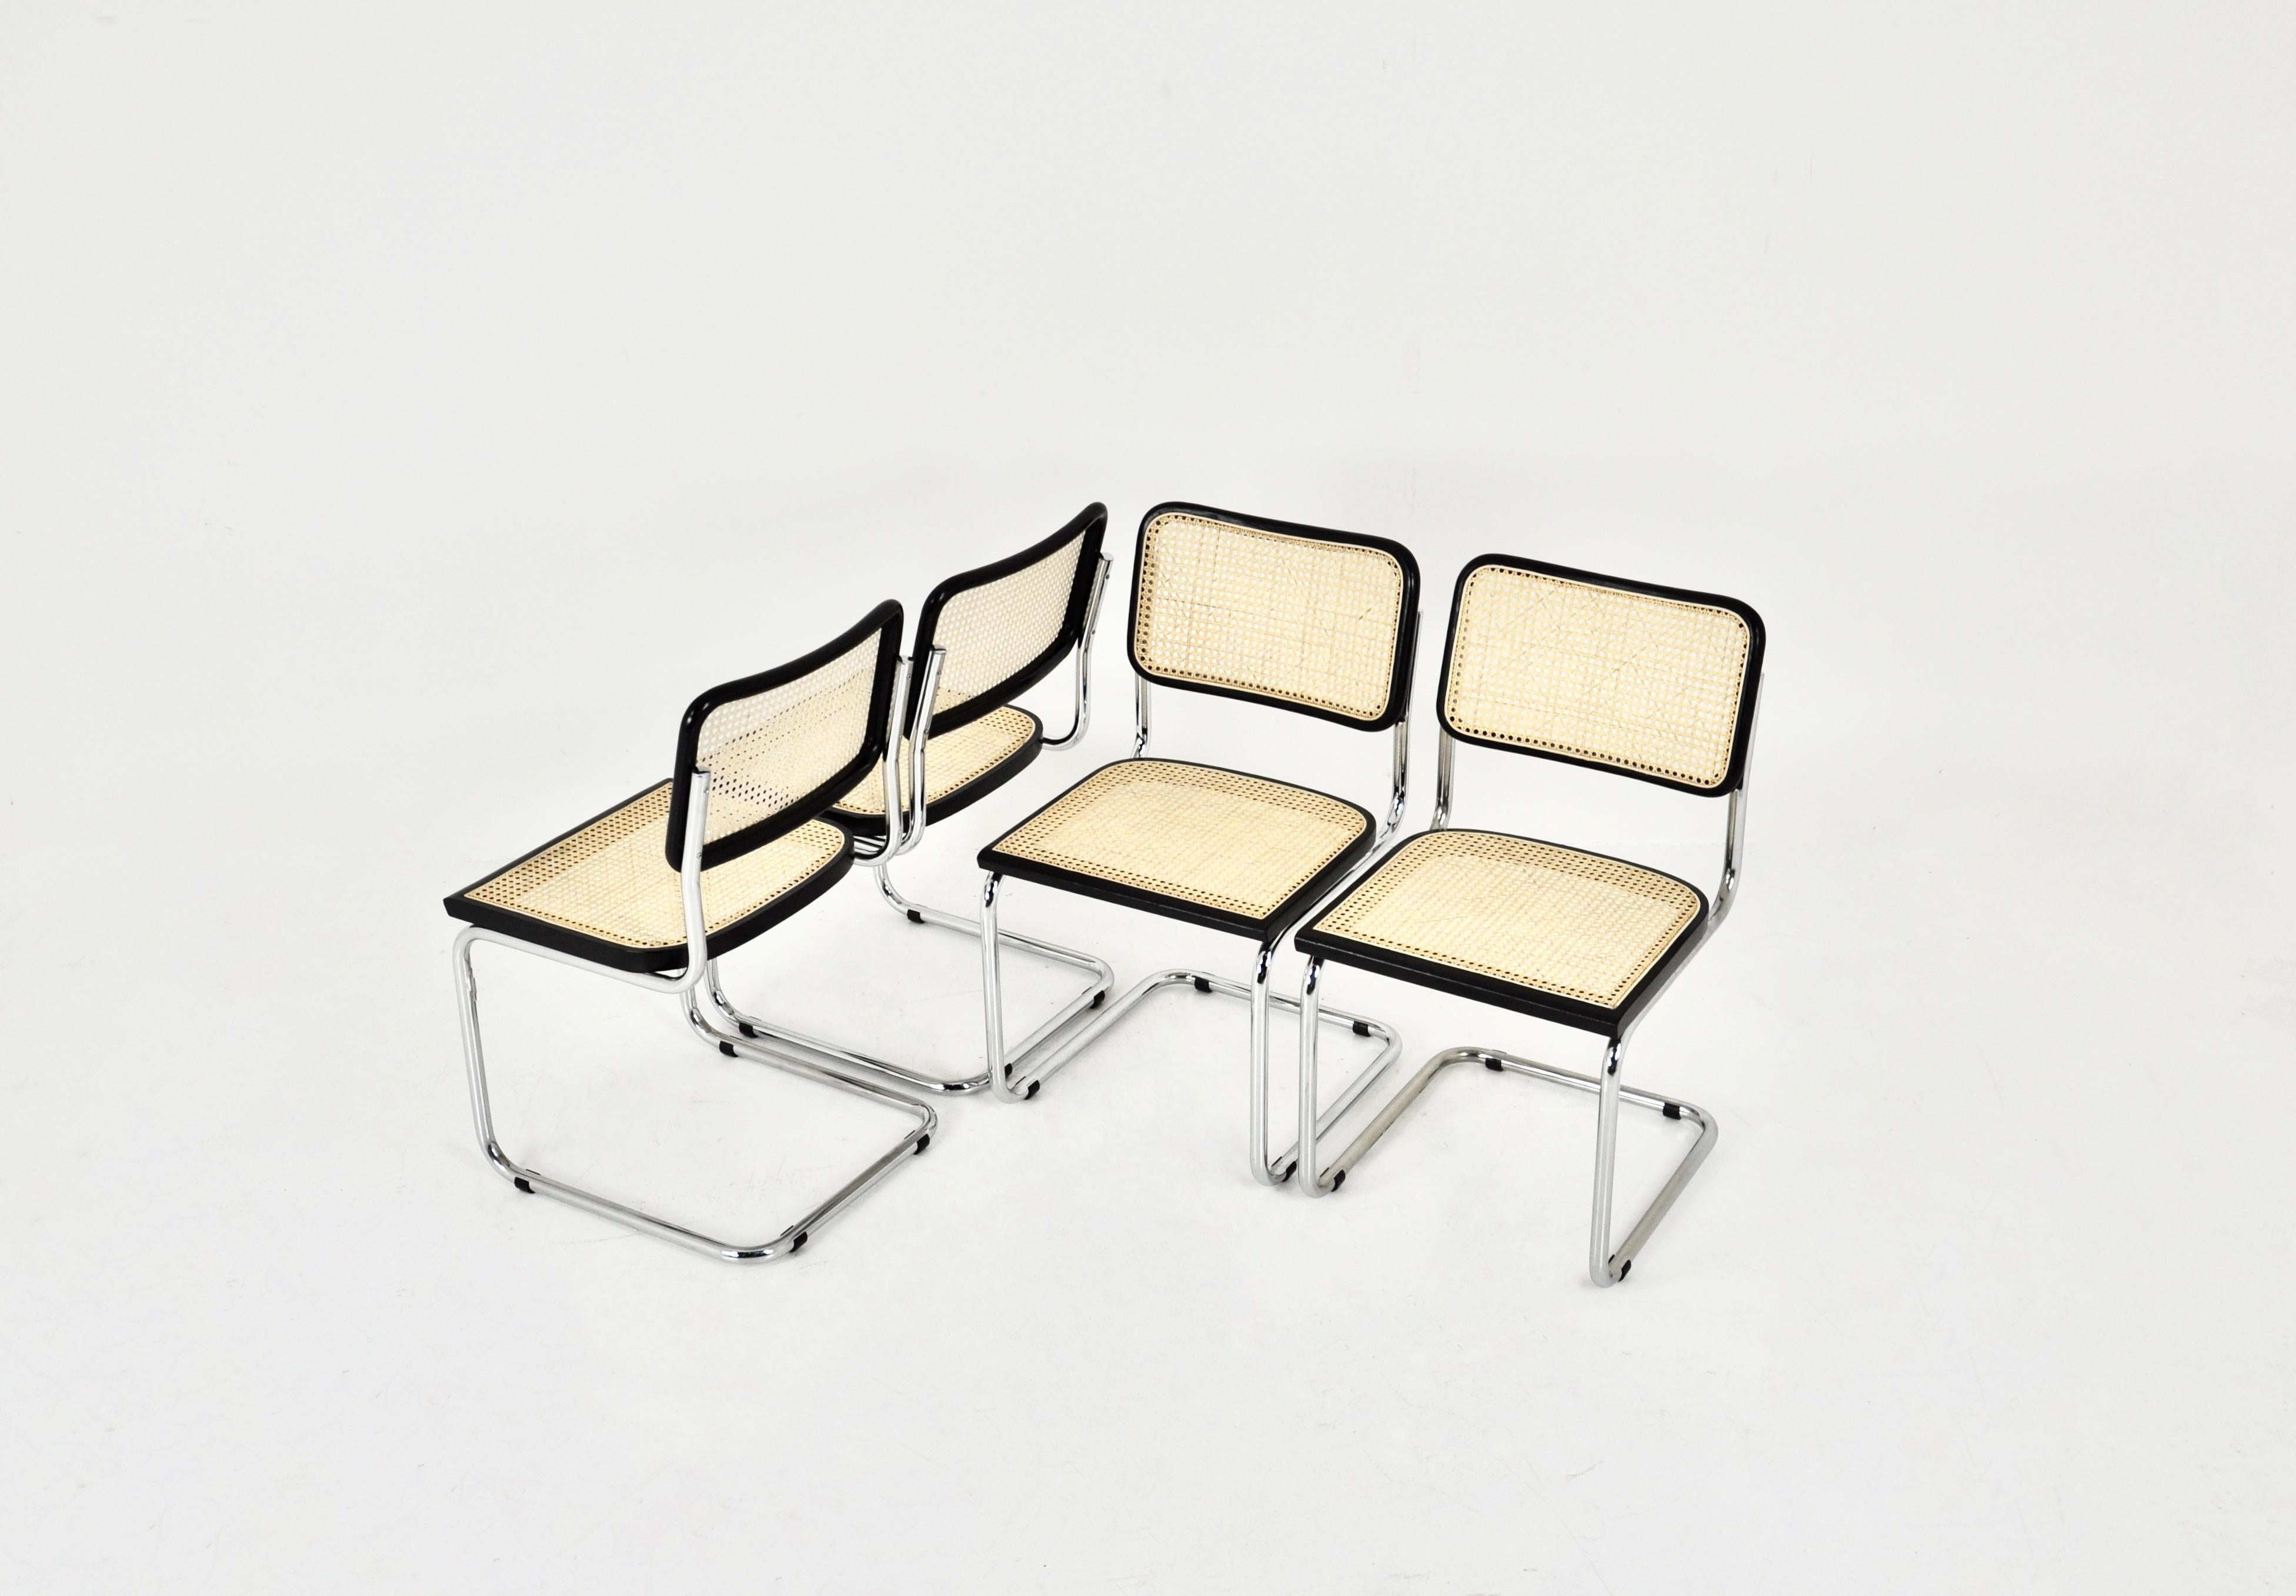 Set of 4 chairs in metal, wood and rattan. Dimensions: seat height: 46 cm. Wear due to time and age of the chairs.